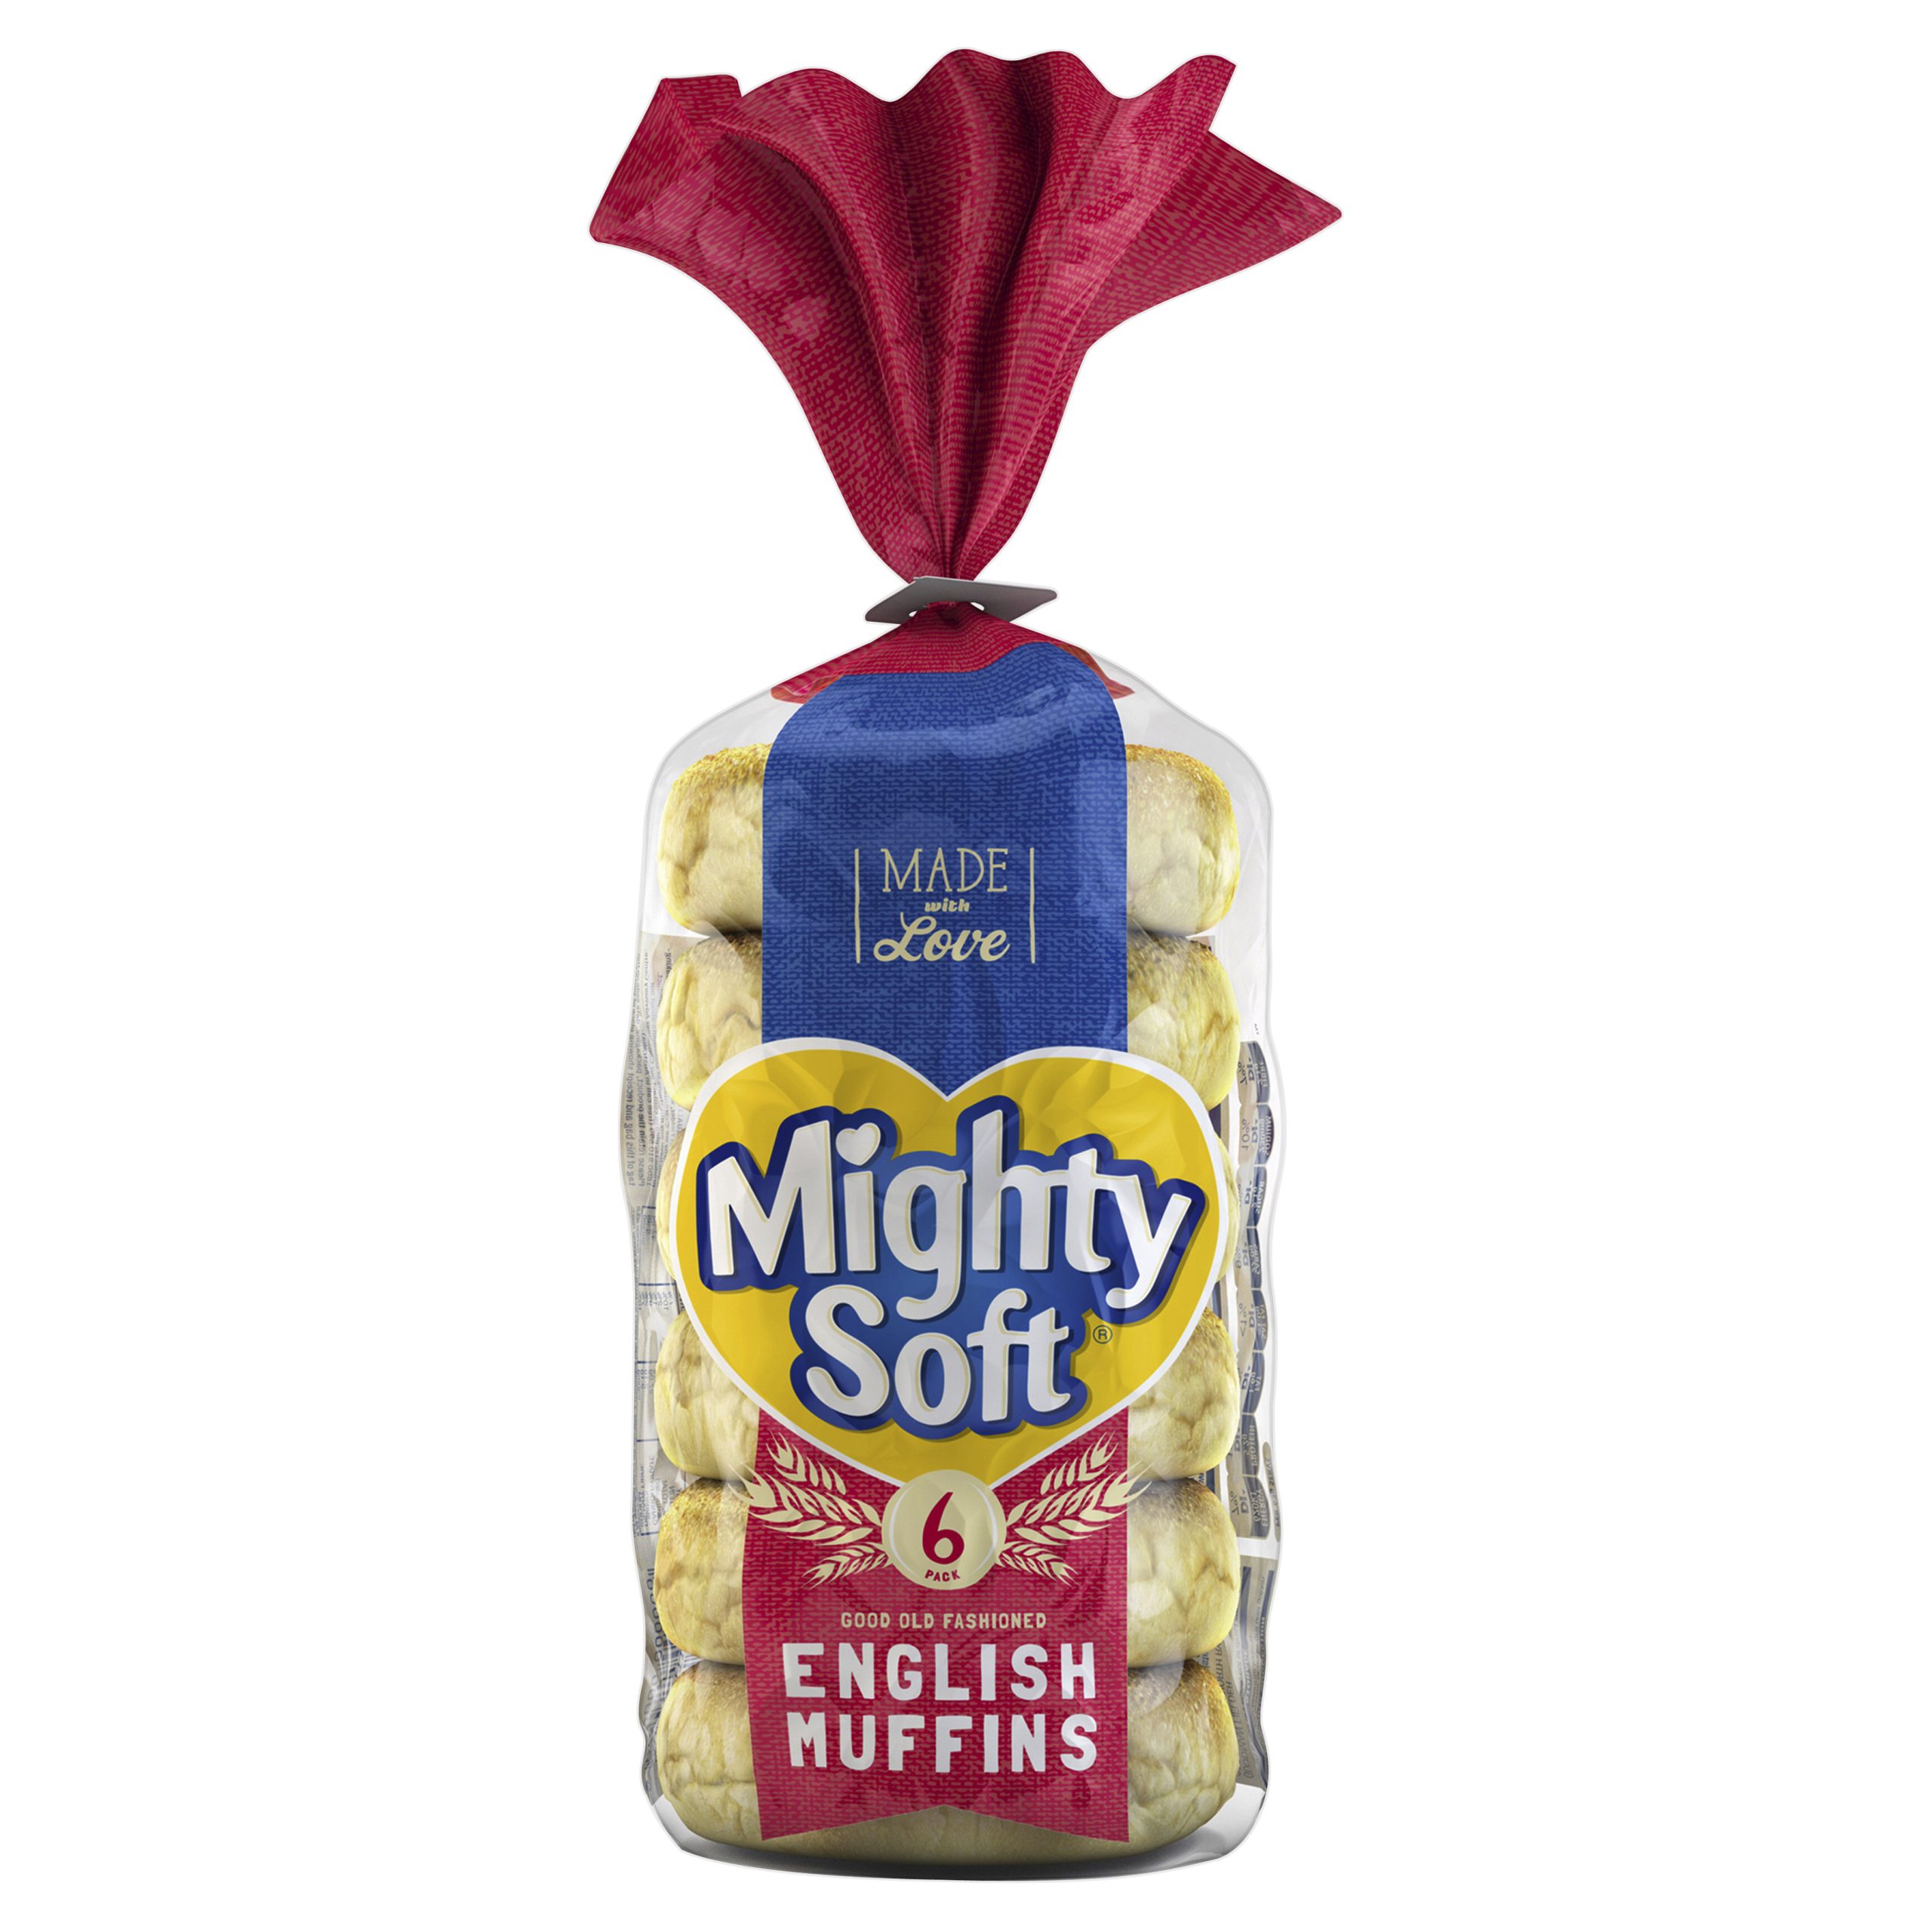 Mighty Soft English Muffin P6 378 g product photo